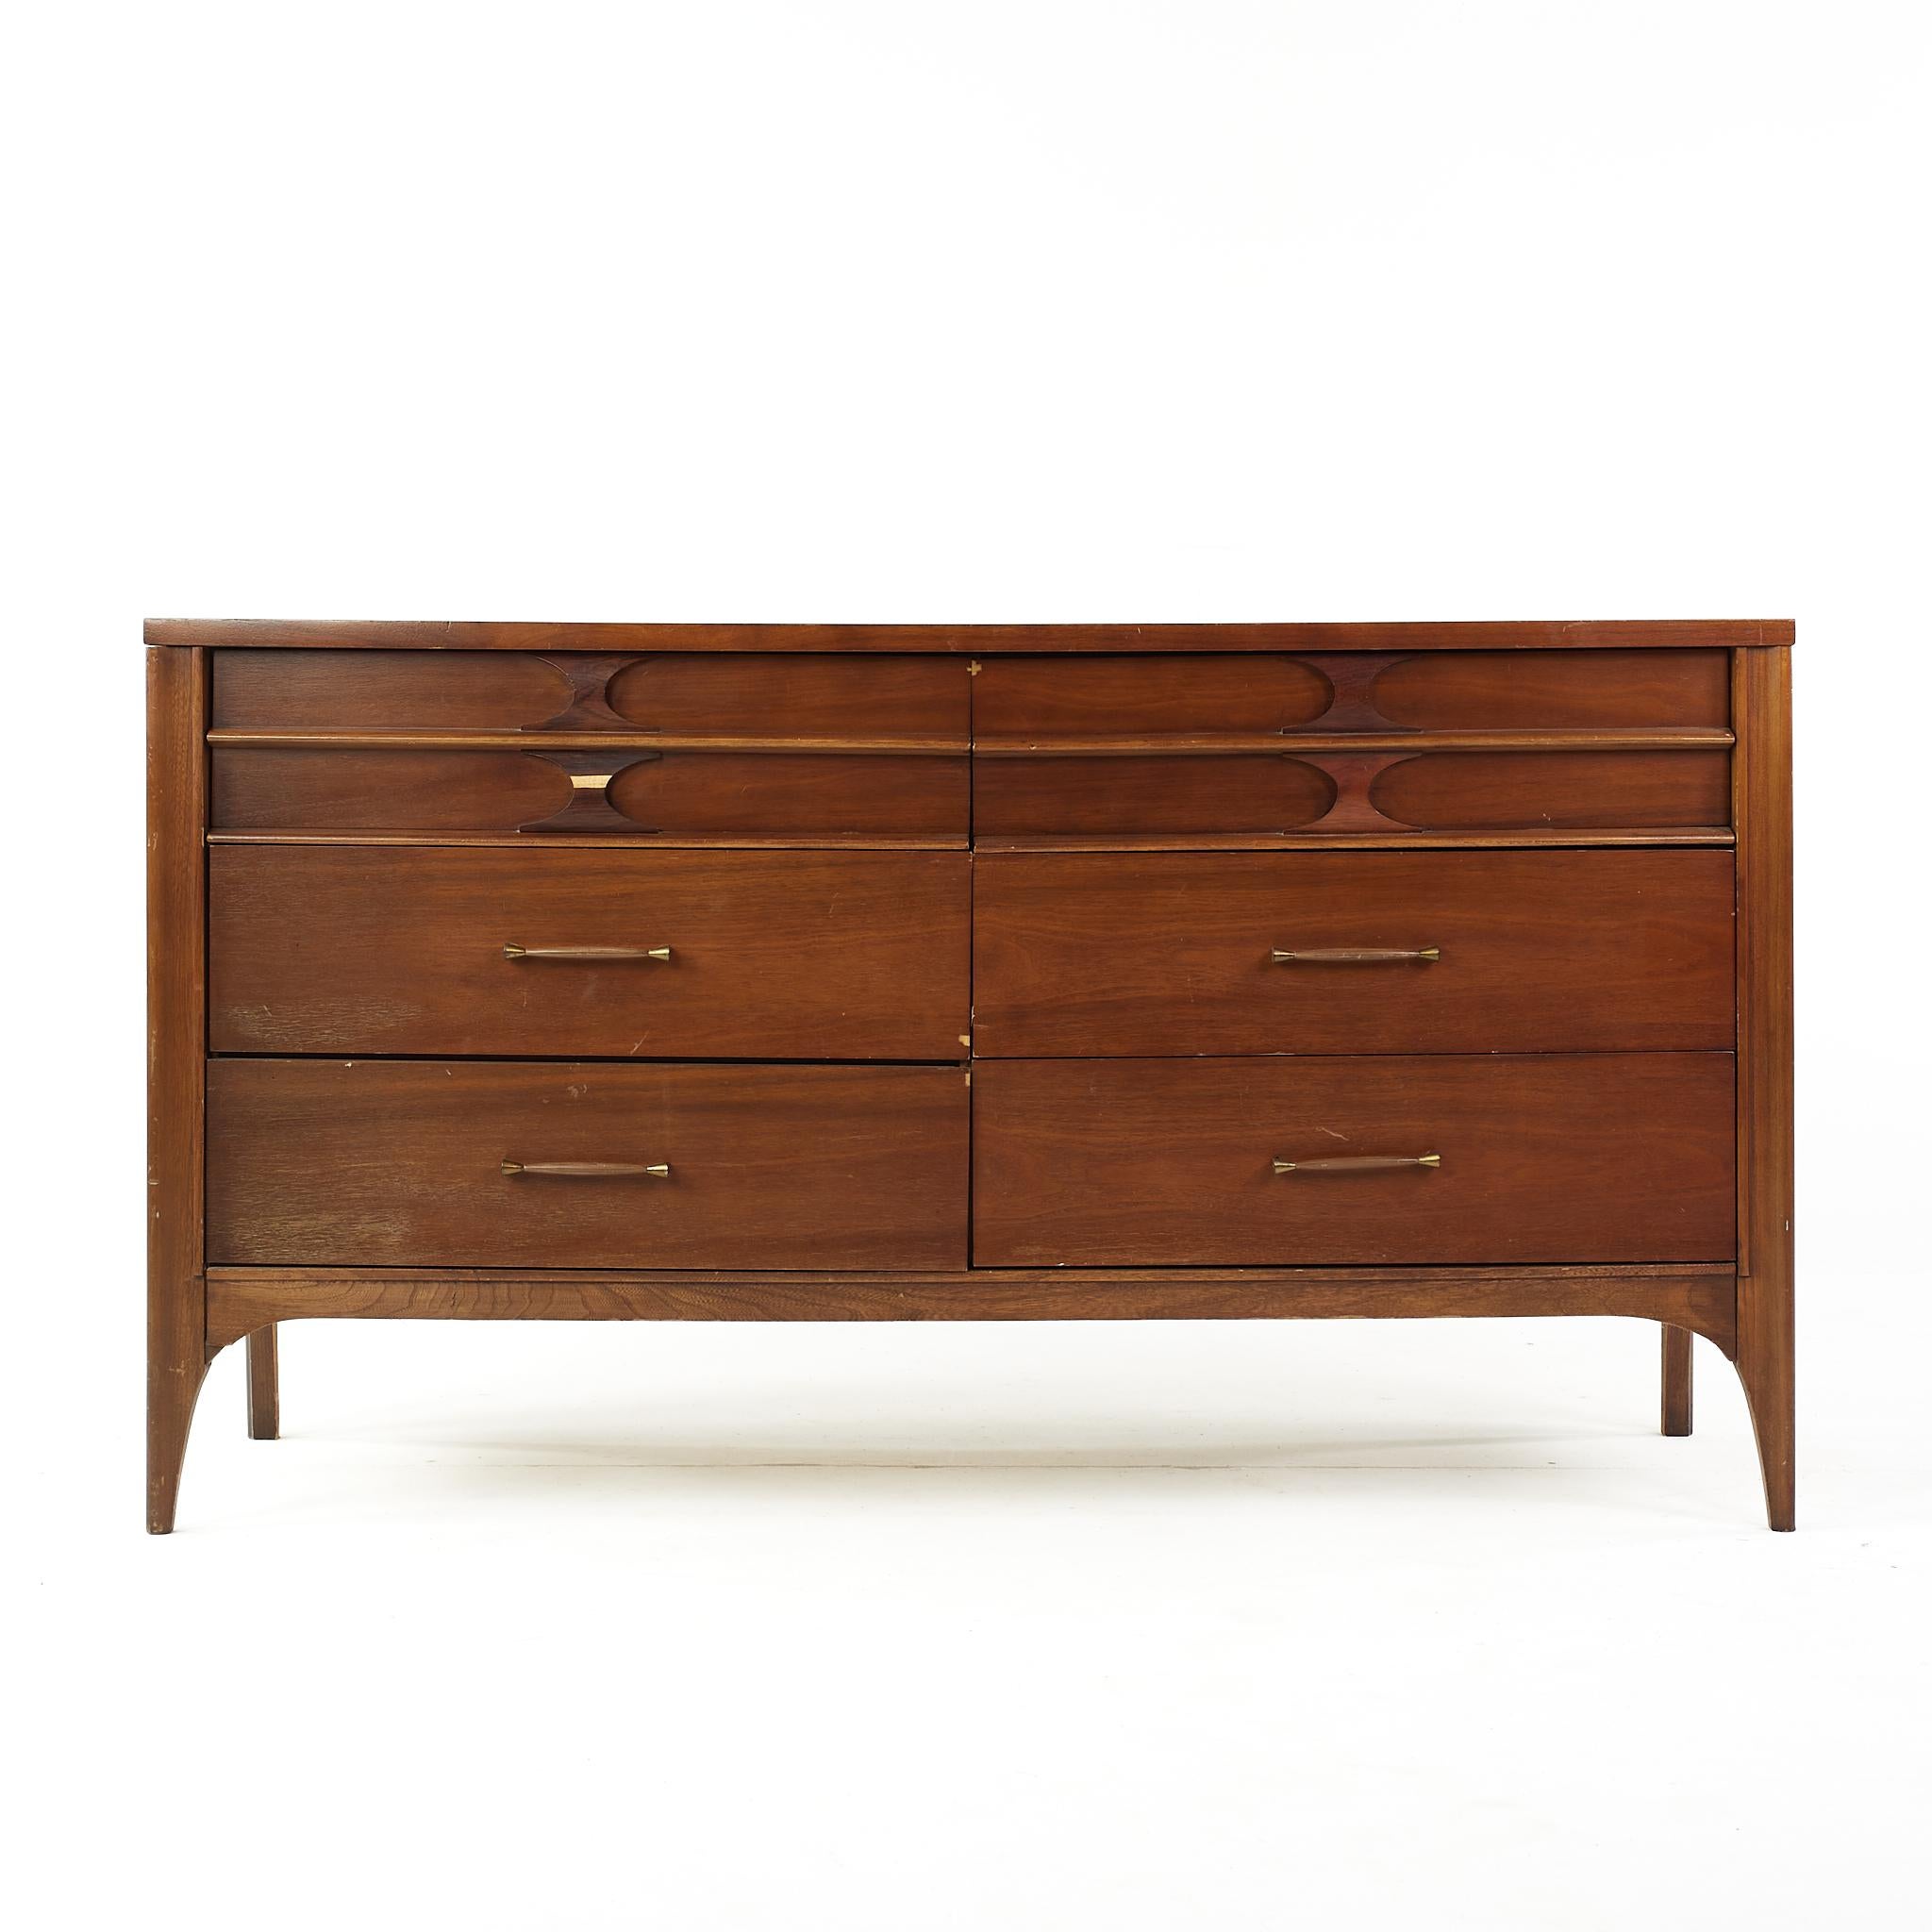 Kent Coffey Perspecta mid century walnut and rosewood 6 drawer lowboy dresser

This lowboy dresser measures: 56 wide x 19 deep x 31 inches high

All pieces of furniture can be had in what we call restored vintage condition. That means the piece